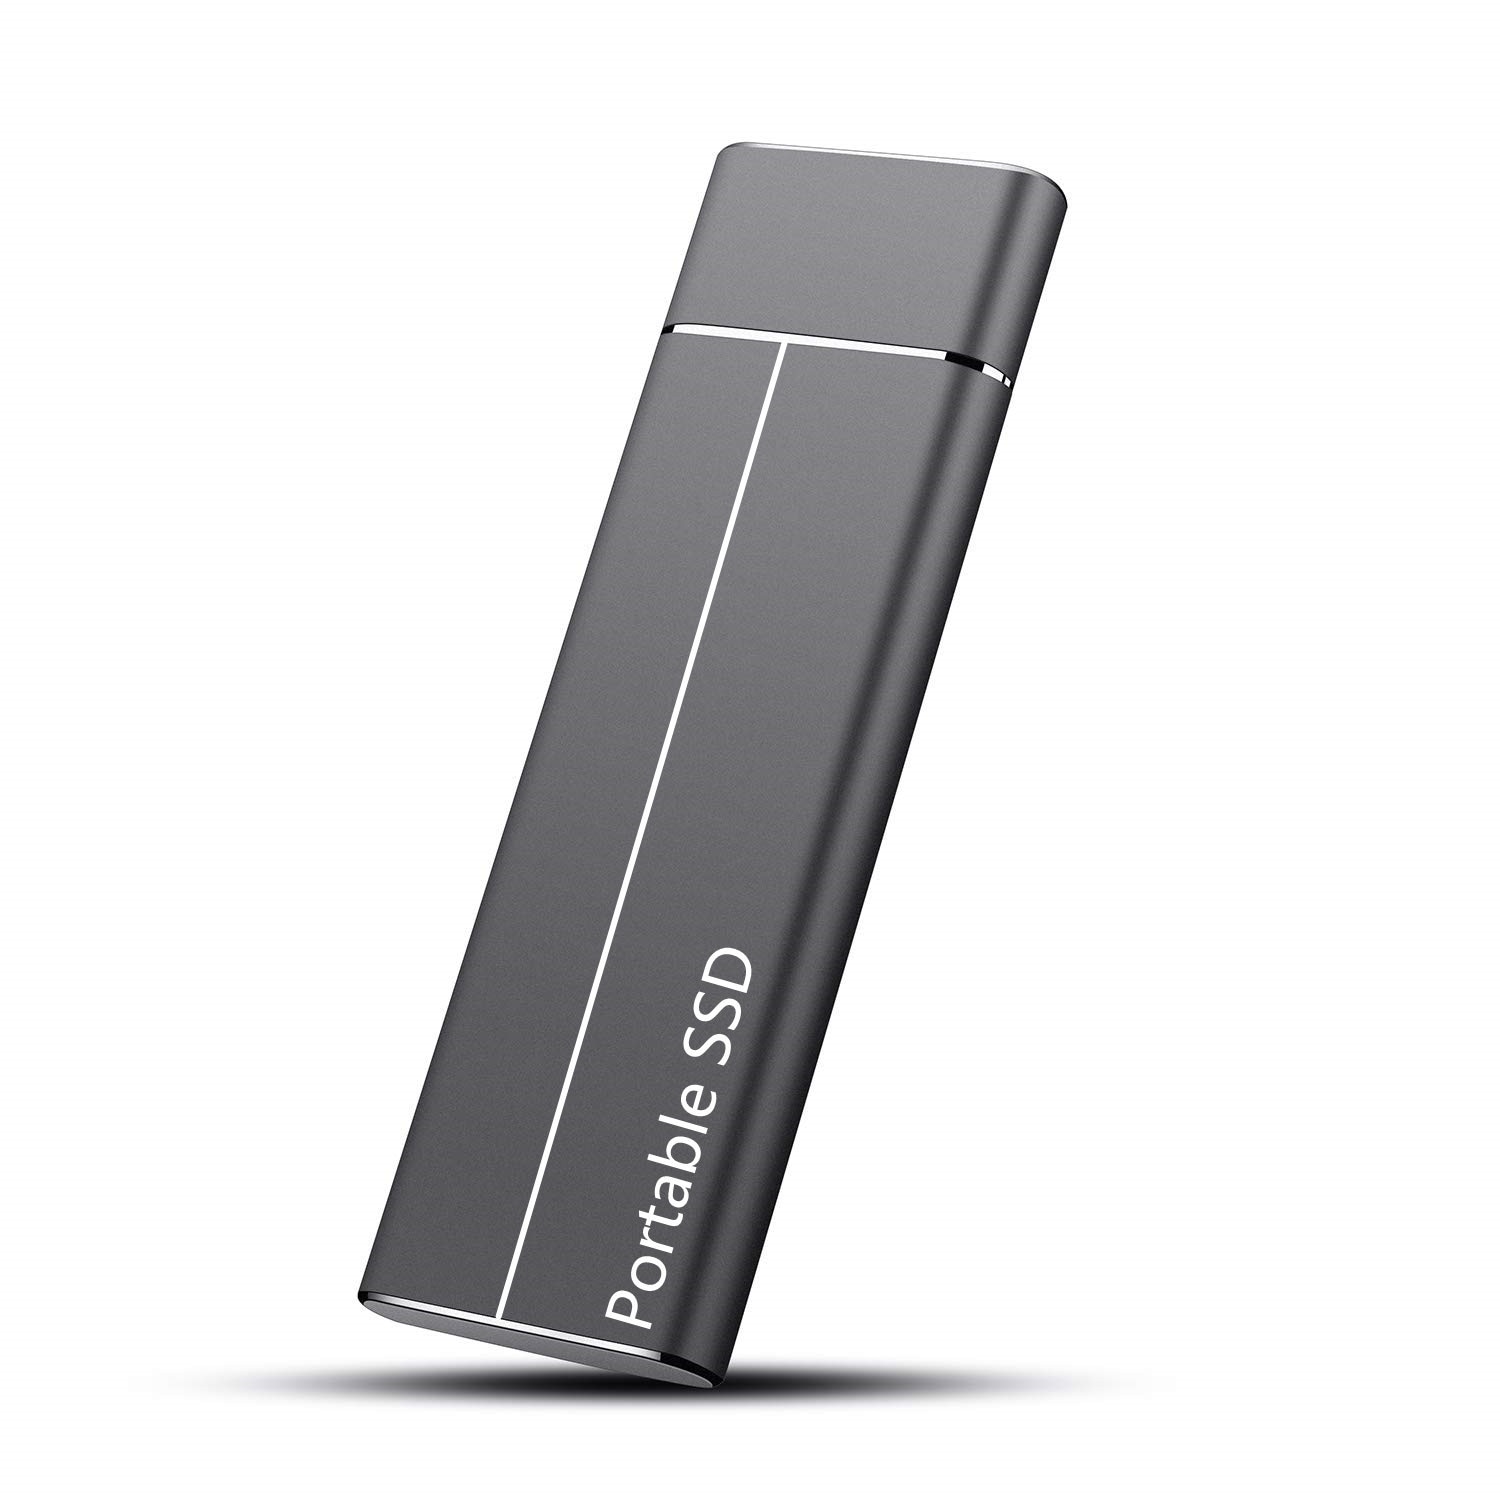 Slim Metal Frosted Design Portable SSD in black color - simply gorgeous